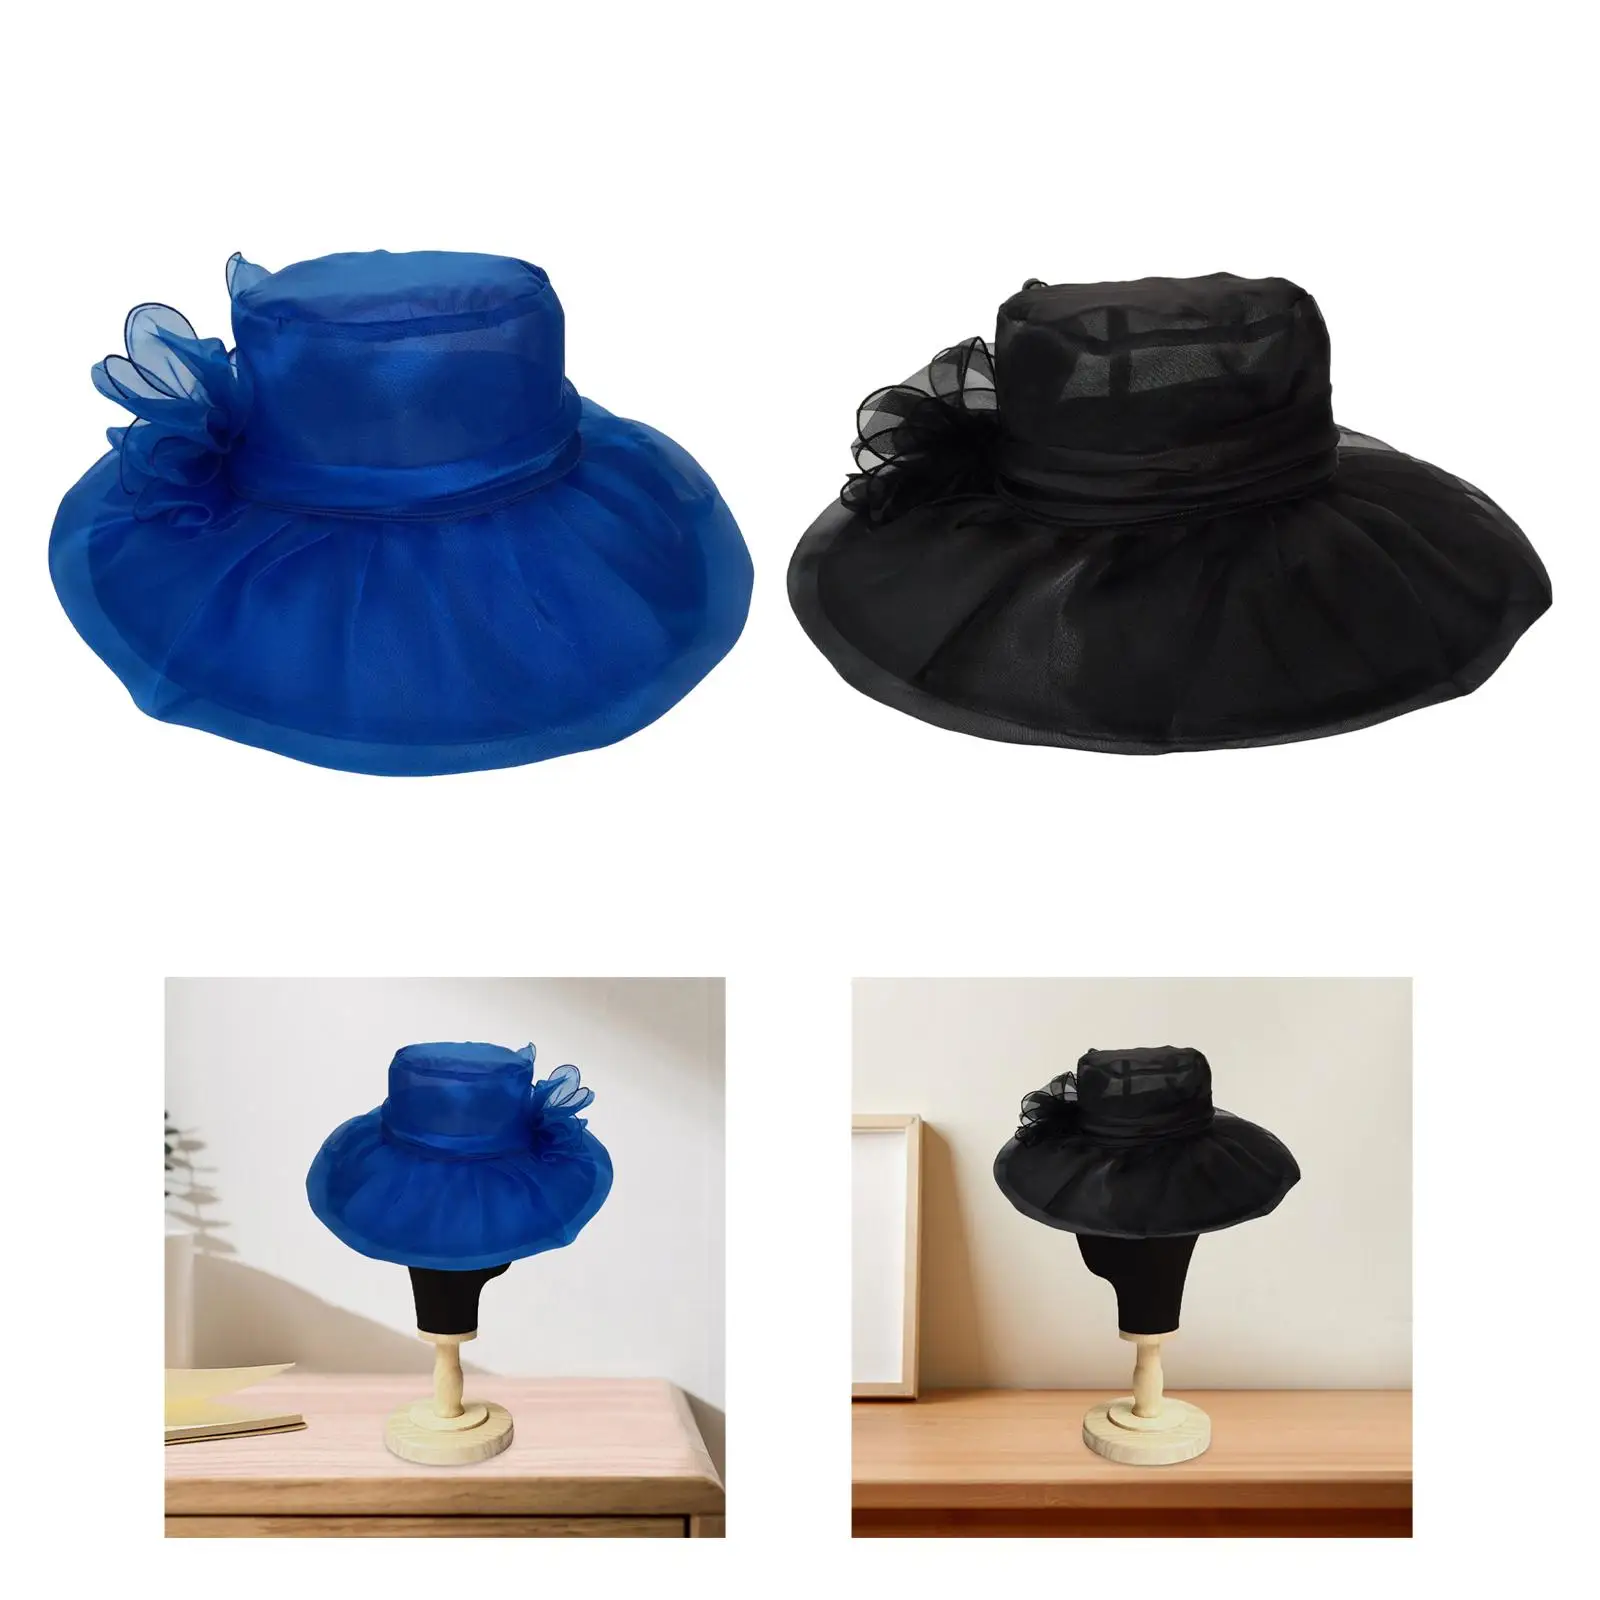 Women Fascinator Hat Tea Party Hat Hats Sun Hat Casual Ladies Organza Charming Hat for Fishing Stage Performance